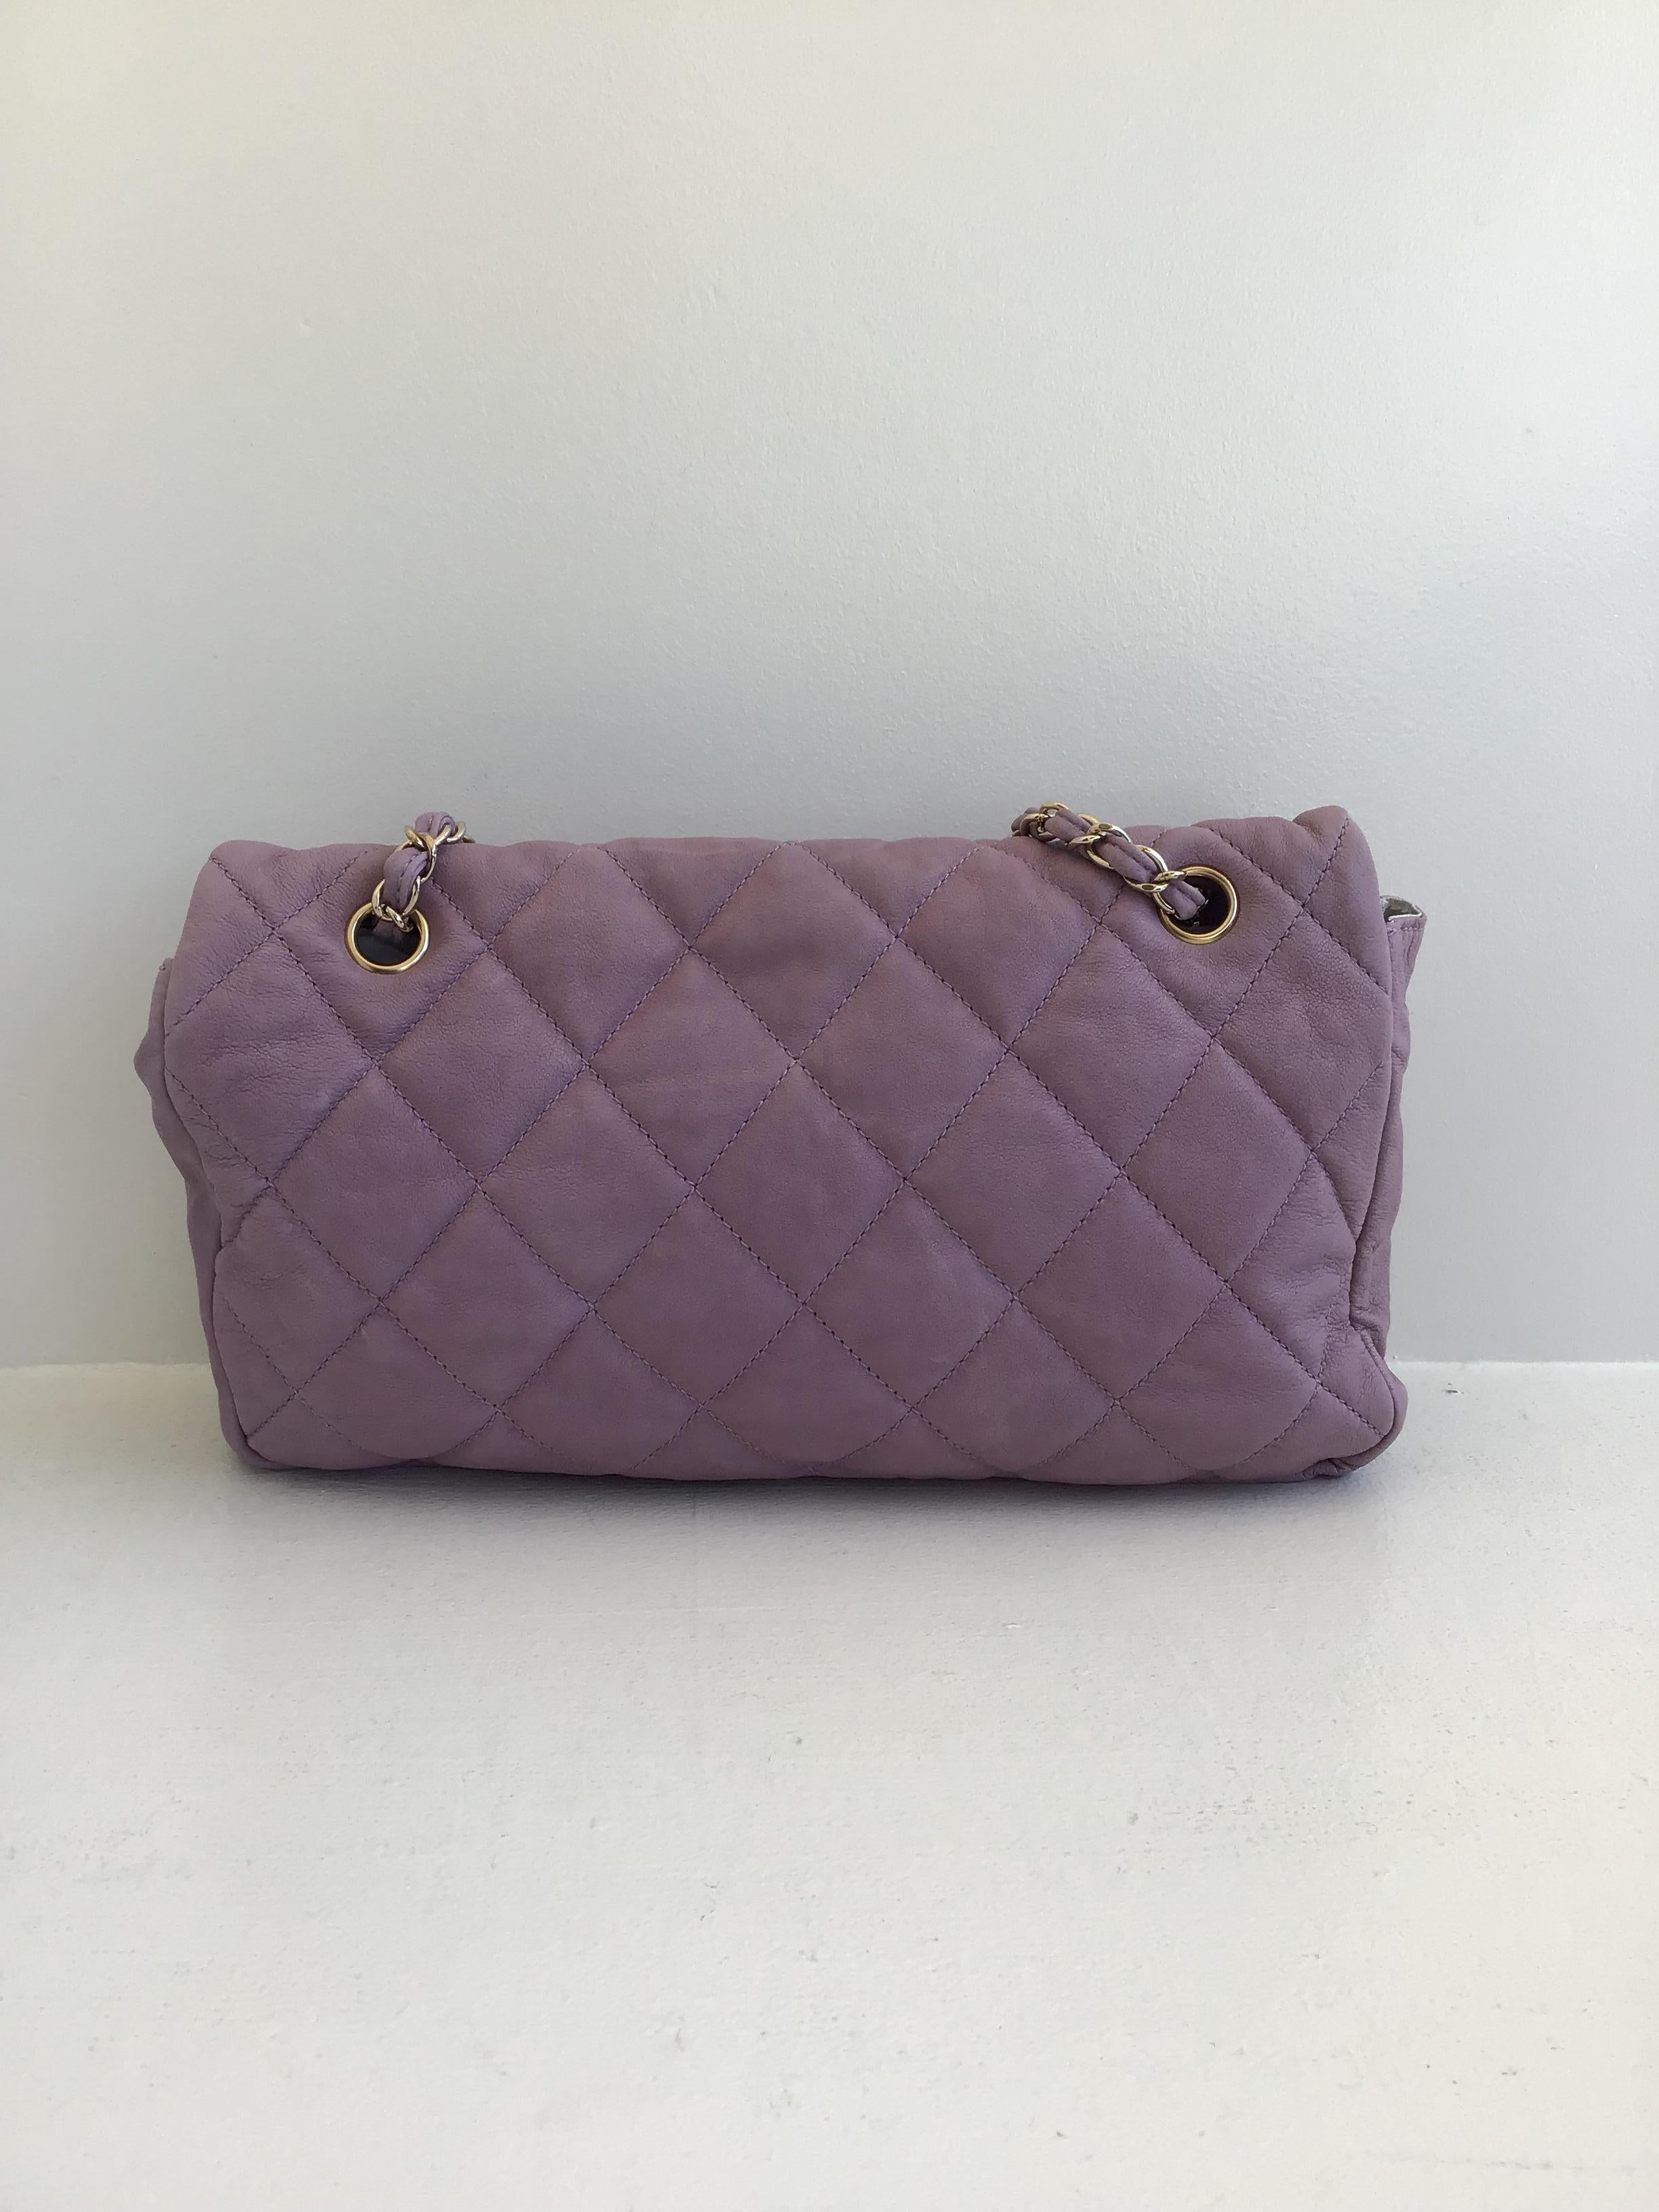 Chanel Lavender Flap Purse with Gold Hardware, Size Medium
Manufacturer Period: 2005 to 2006
Included:
Card of Authenticity
2X2 Black Envelope (Care Instructions)
Description:
Size: Medium
Leather: Lambskin
Color: Lavender
Lining: Chanel Embossed